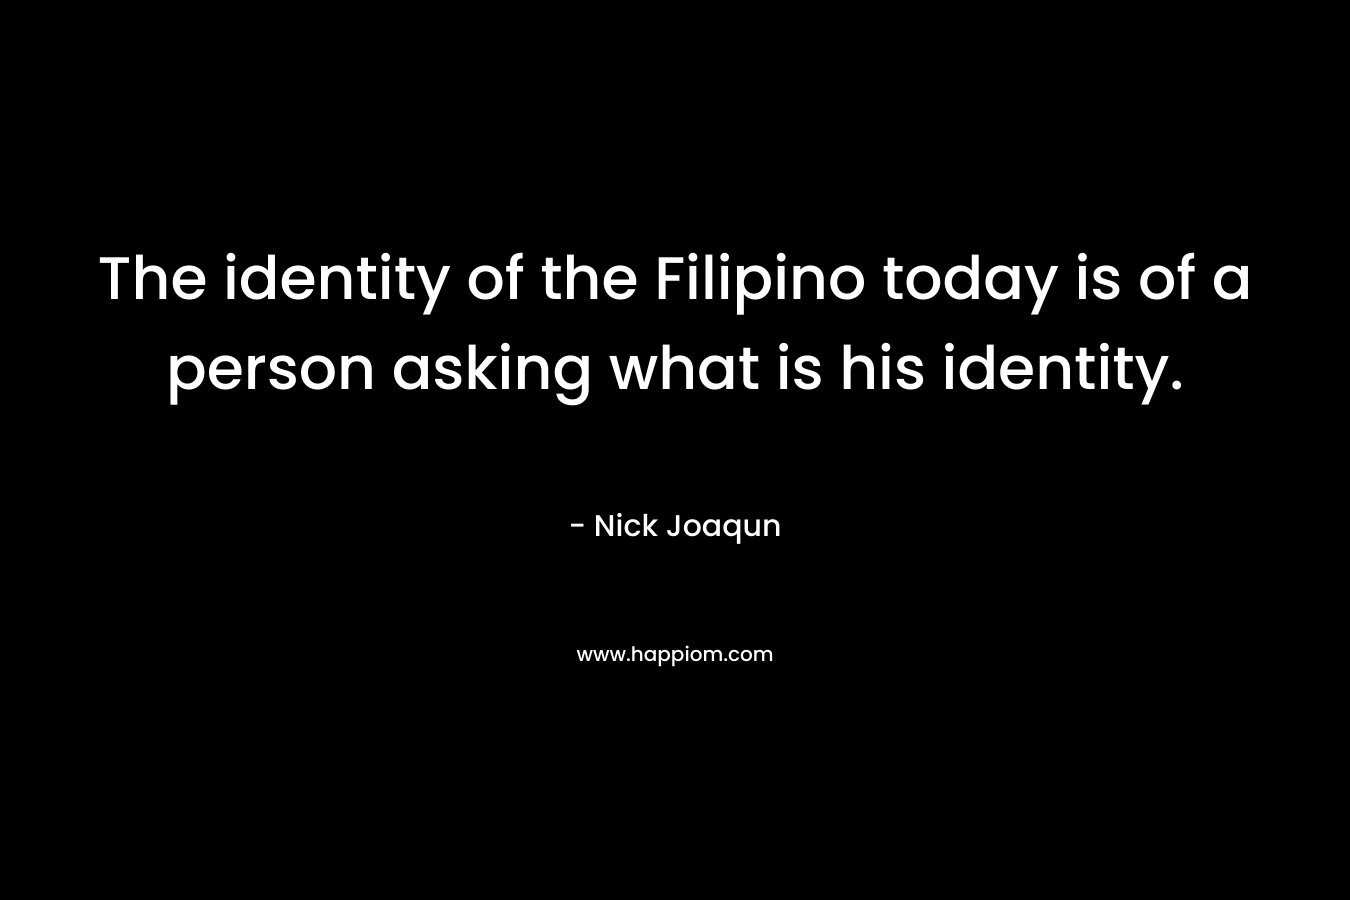 The identity of the Filipino today is of a person asking what is his identity.